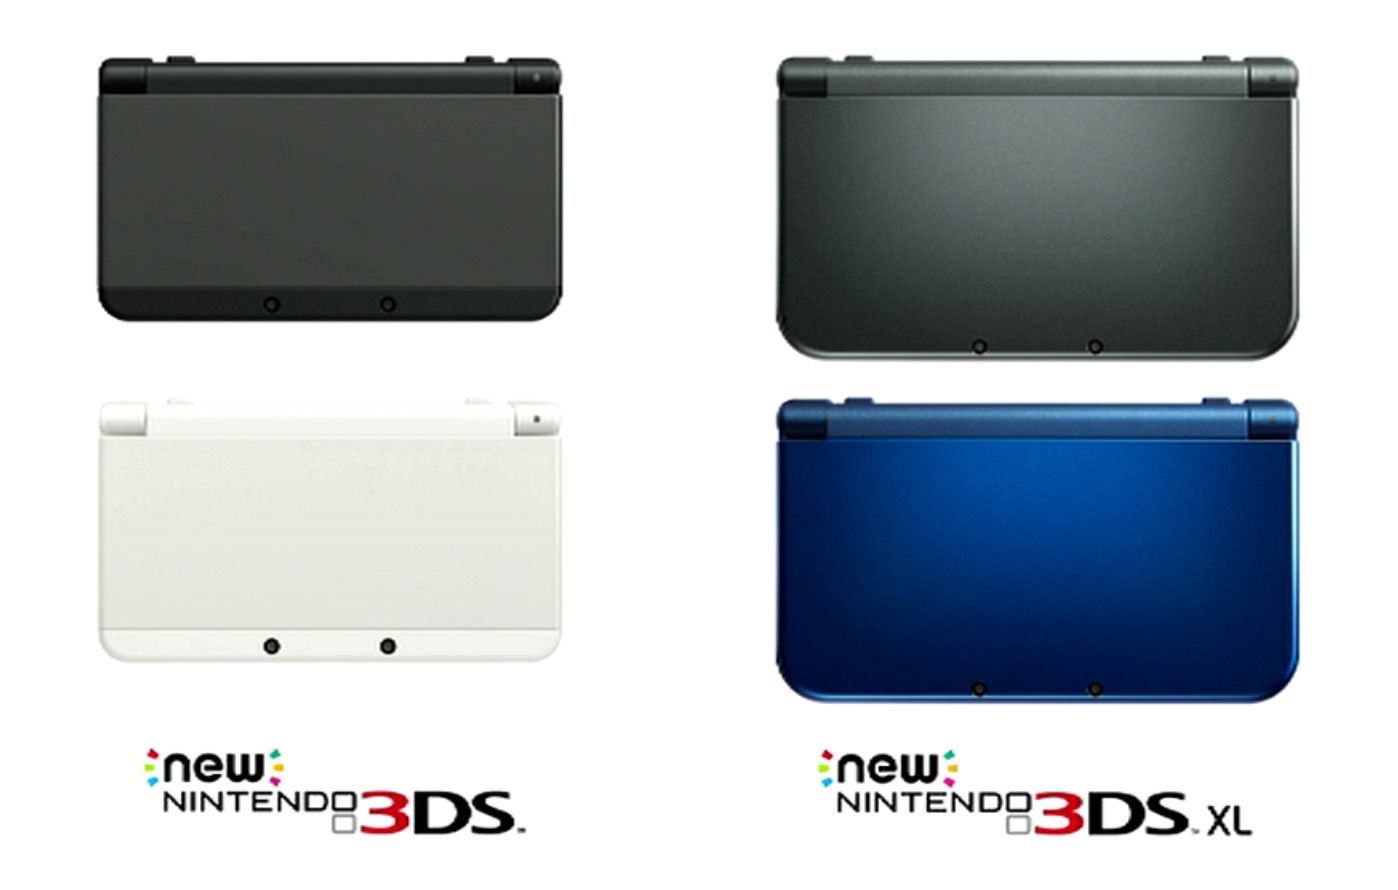 nintendo bringing new 3ds and new 3ds xl handhelds to uk and europe 13 february image 1